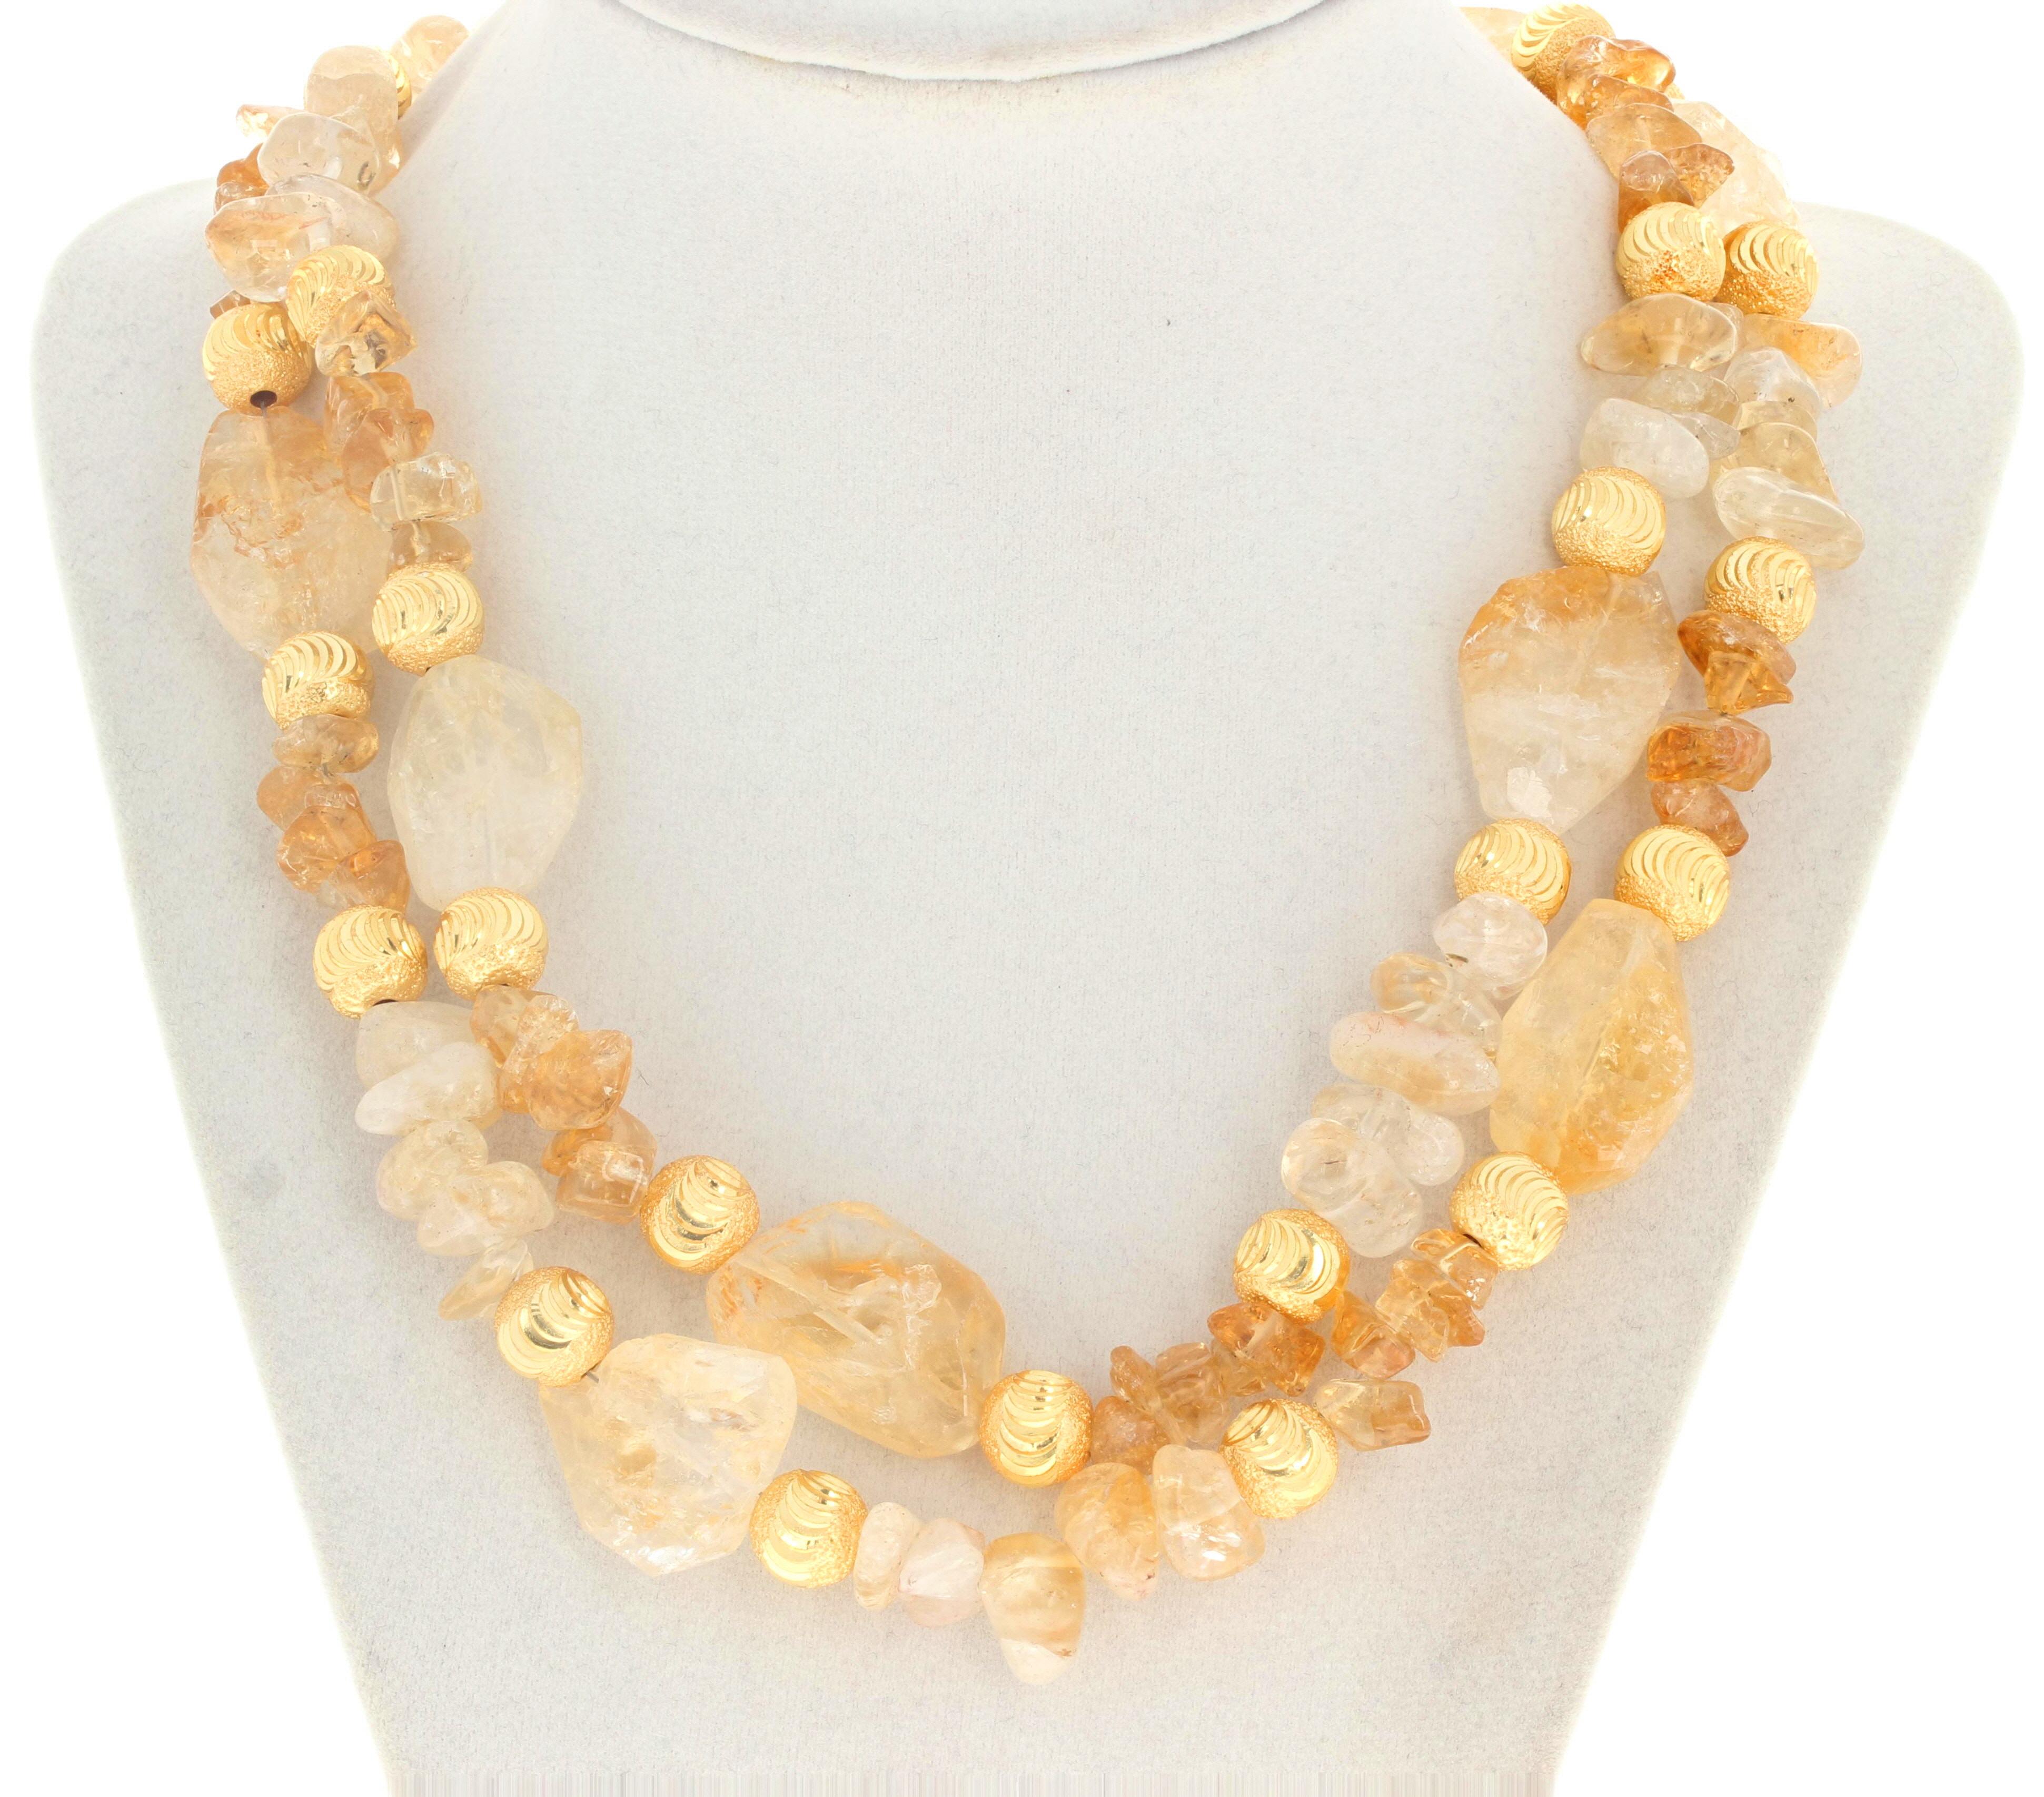 Mixed Cut AJD Dramatic Natural REAL Citrine Gemstone Polished Rocks Necklace